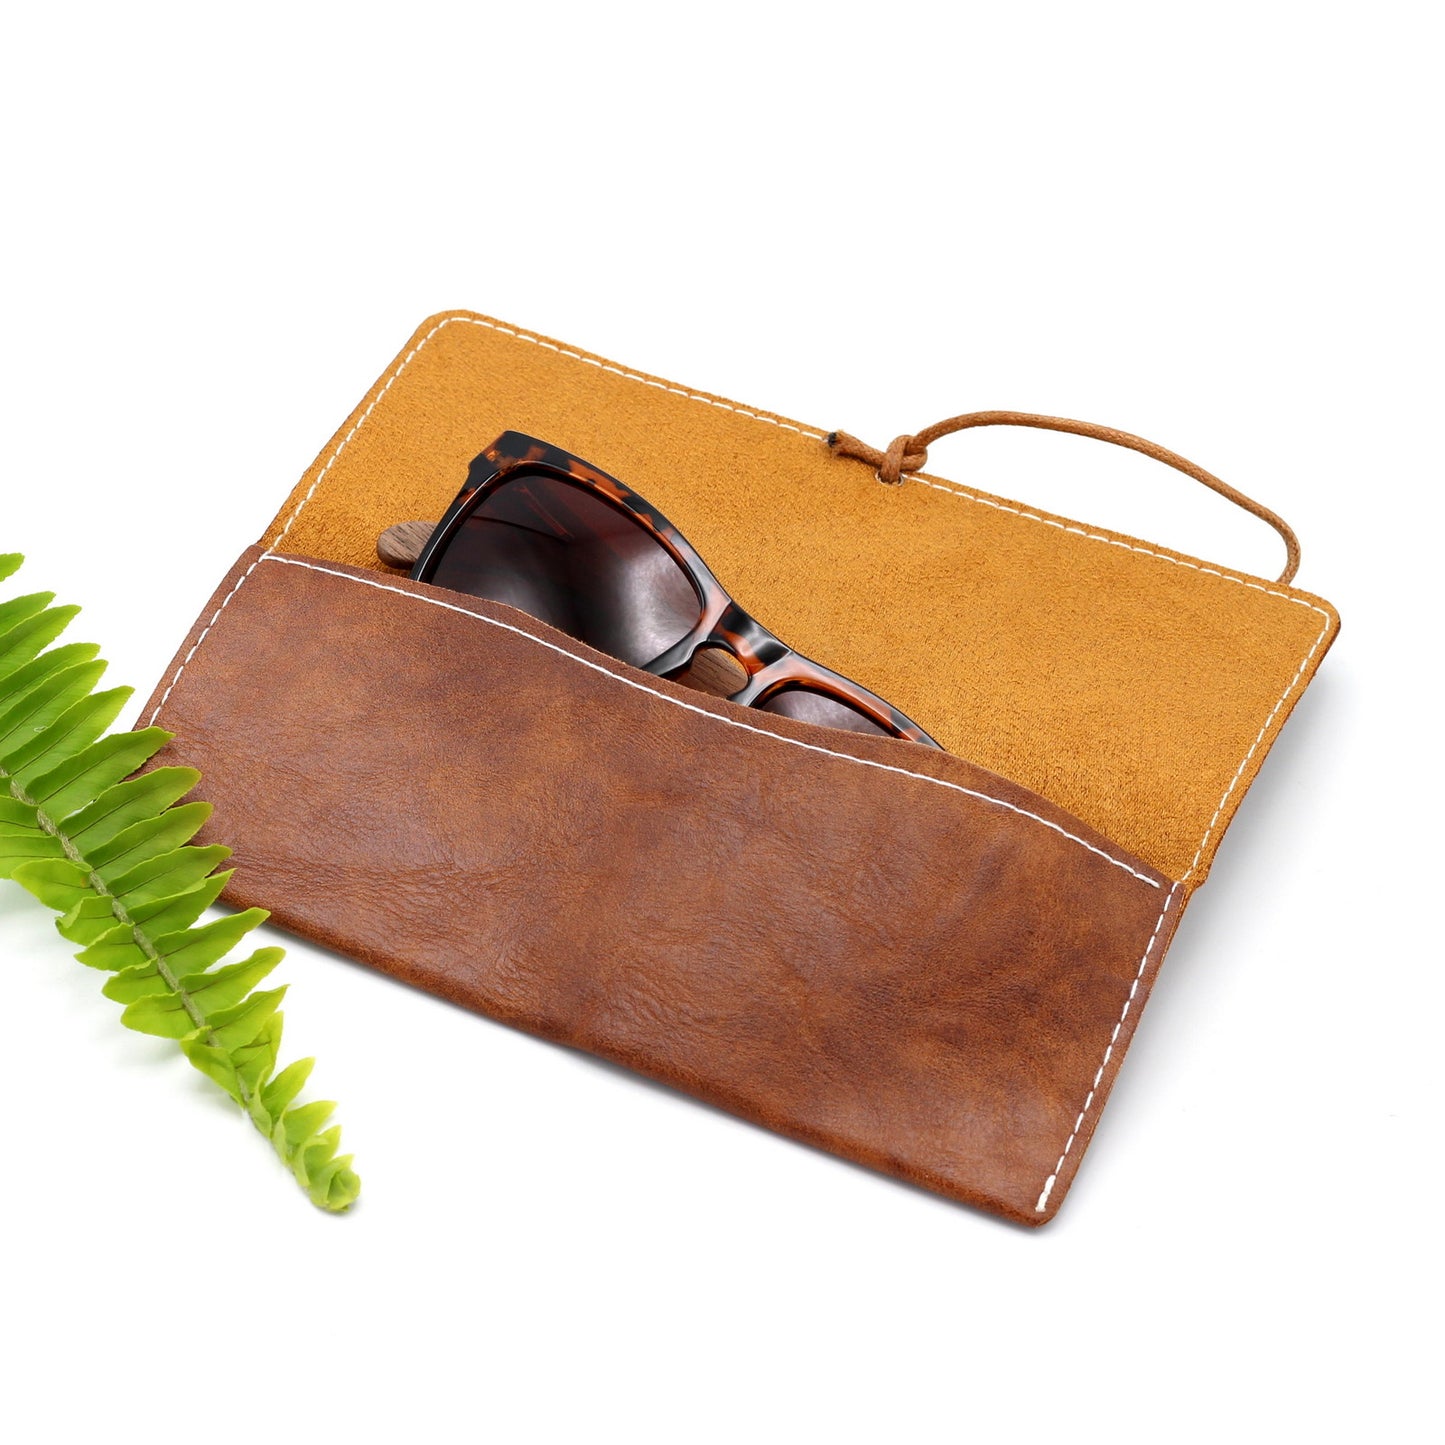 Leather Fold Over Sunglasses Case 3 COLOURS Personalise It